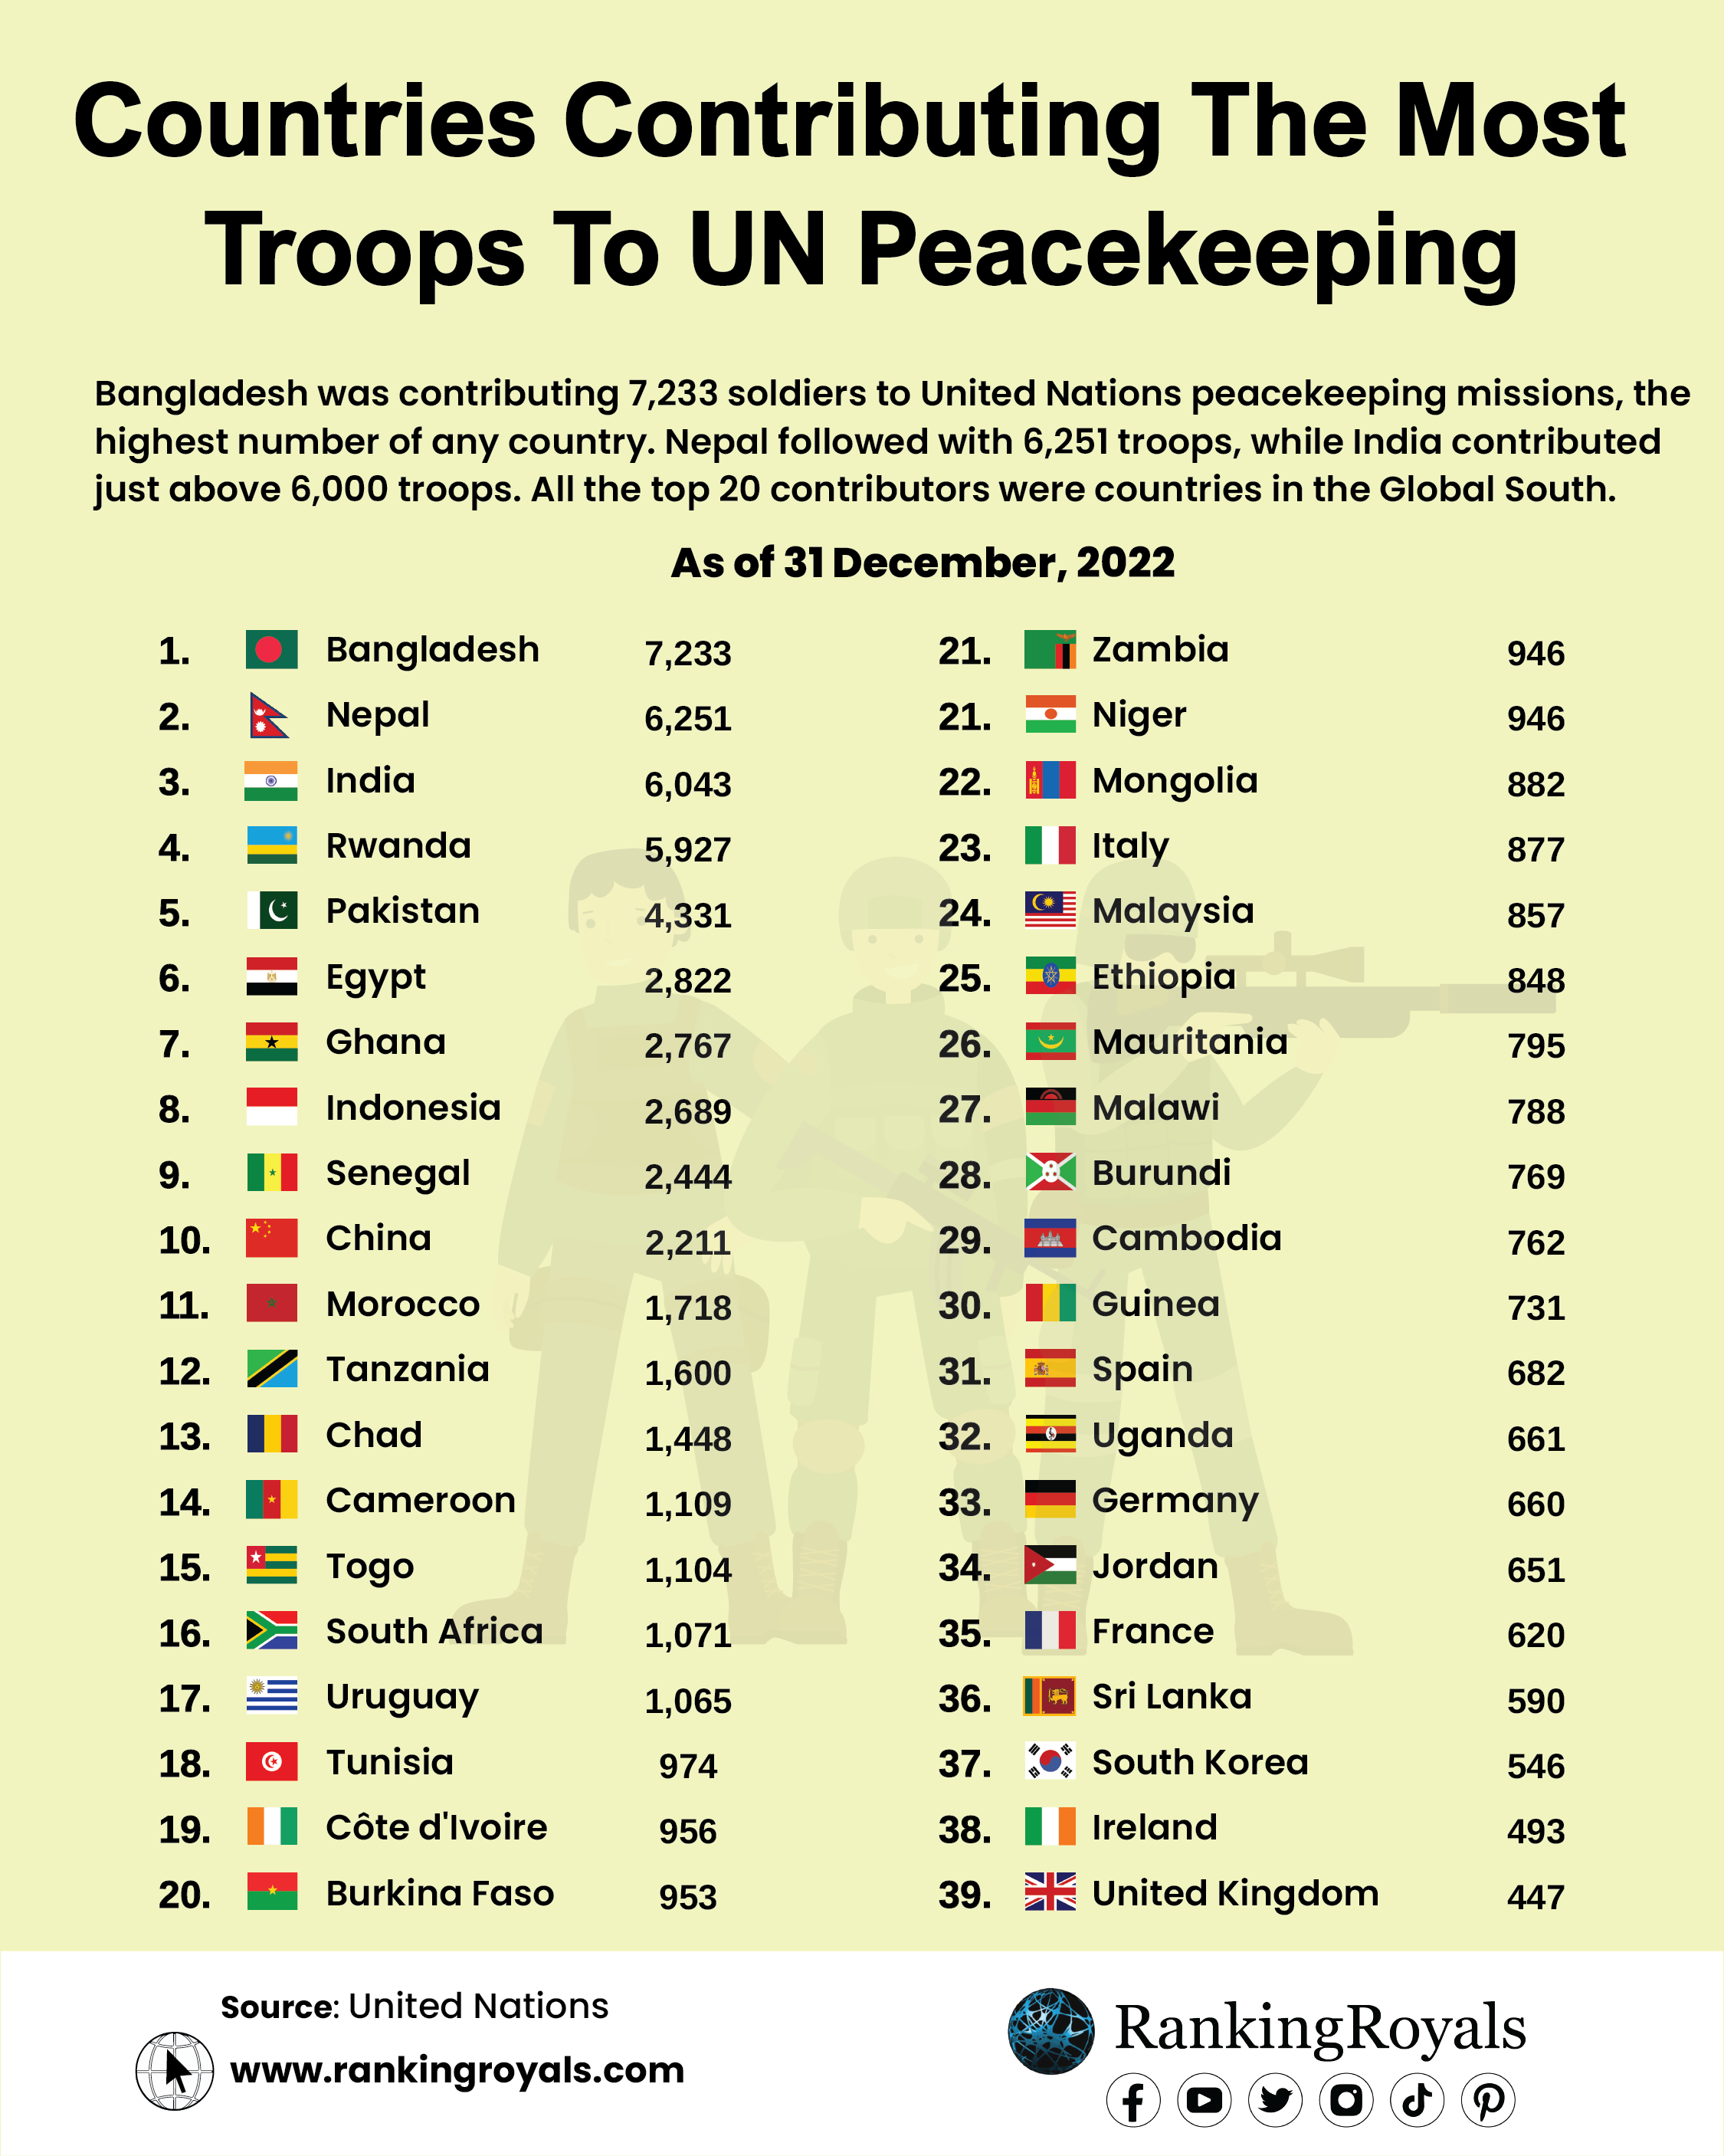 Countries-Contributing-The-Most-Troops-To-UN-Peacekeeping